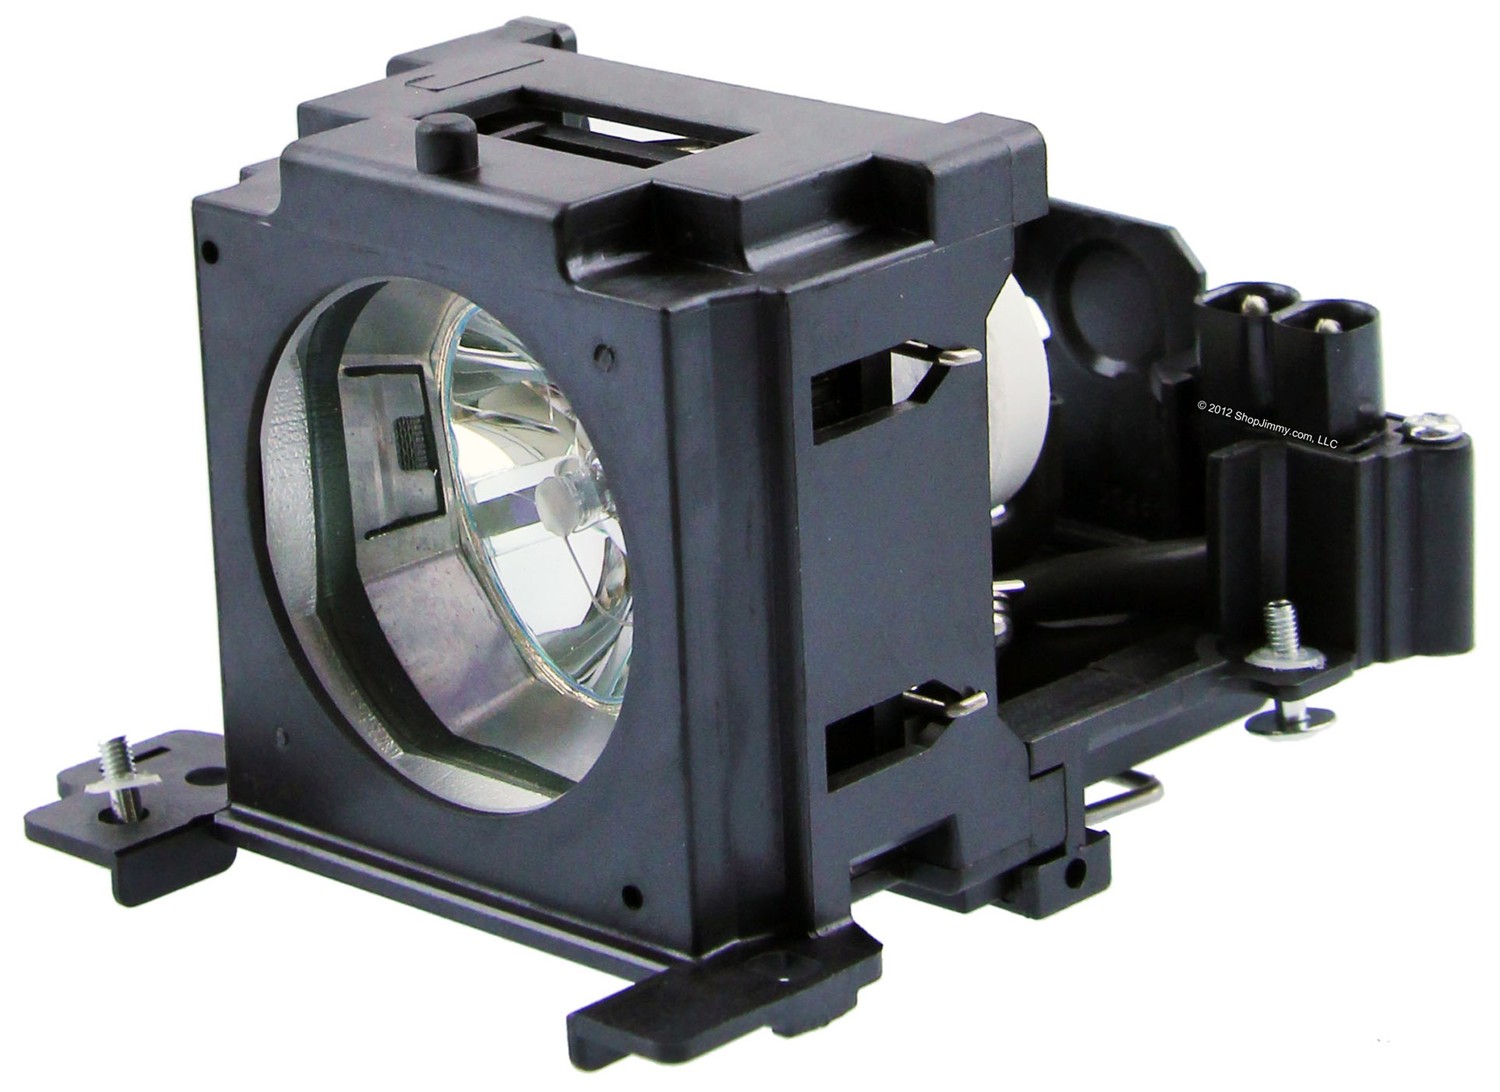 X62W 3M Projector Lamp Replacement. Projector Lamp Assembly with High Quality Genuine Original Philips UHP Bulb Inside